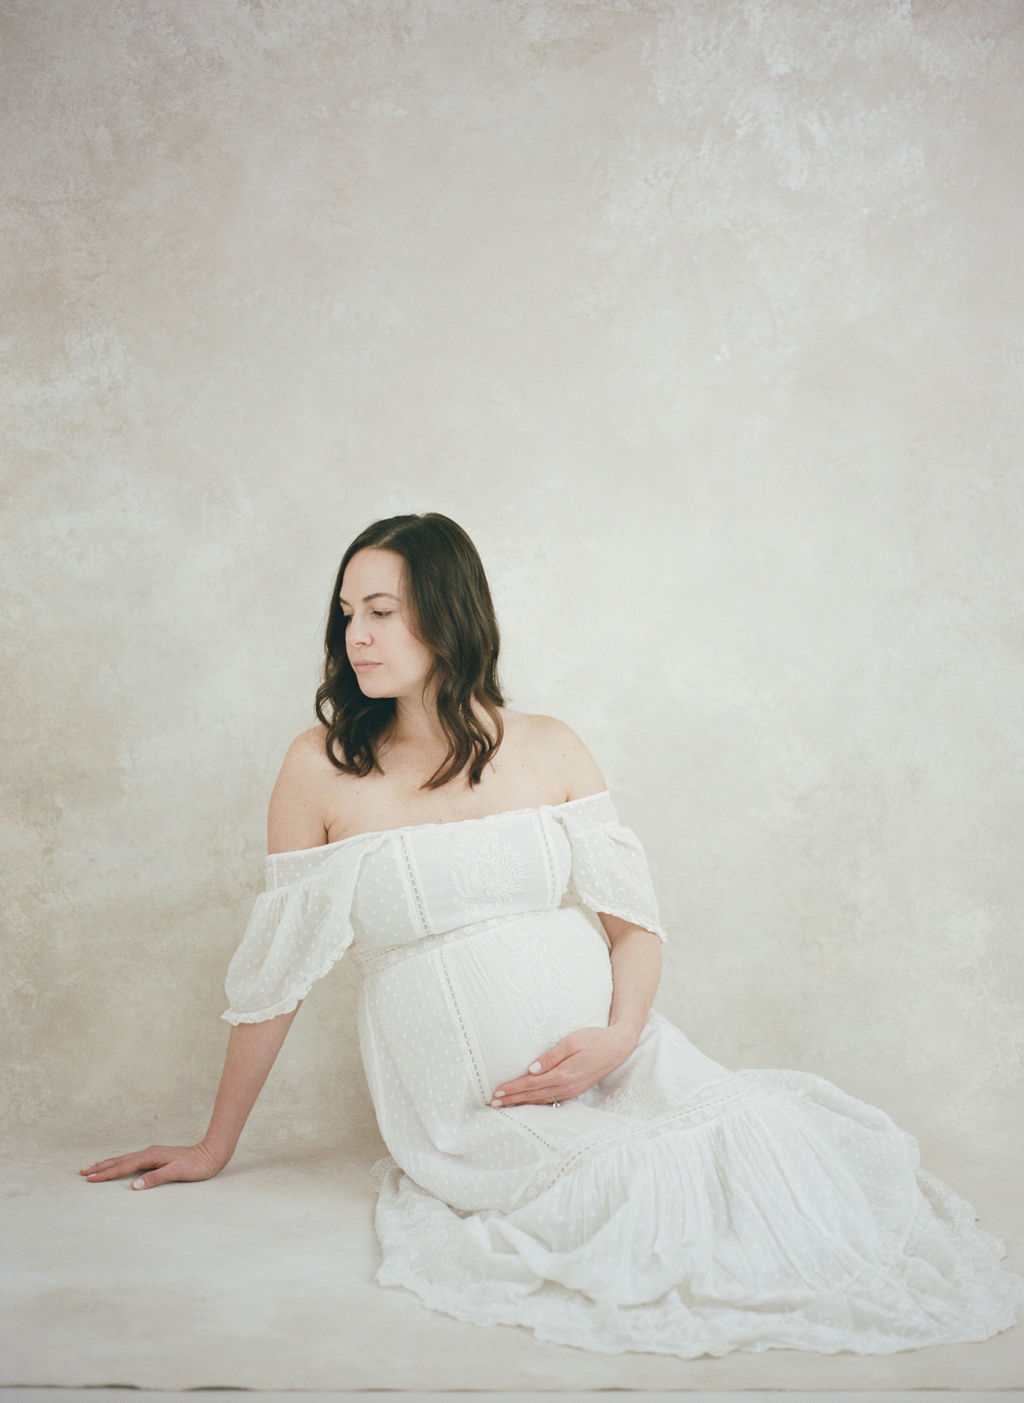 A woman lays across the floor in a studio wearing a white off-the-shoulder maternity dress